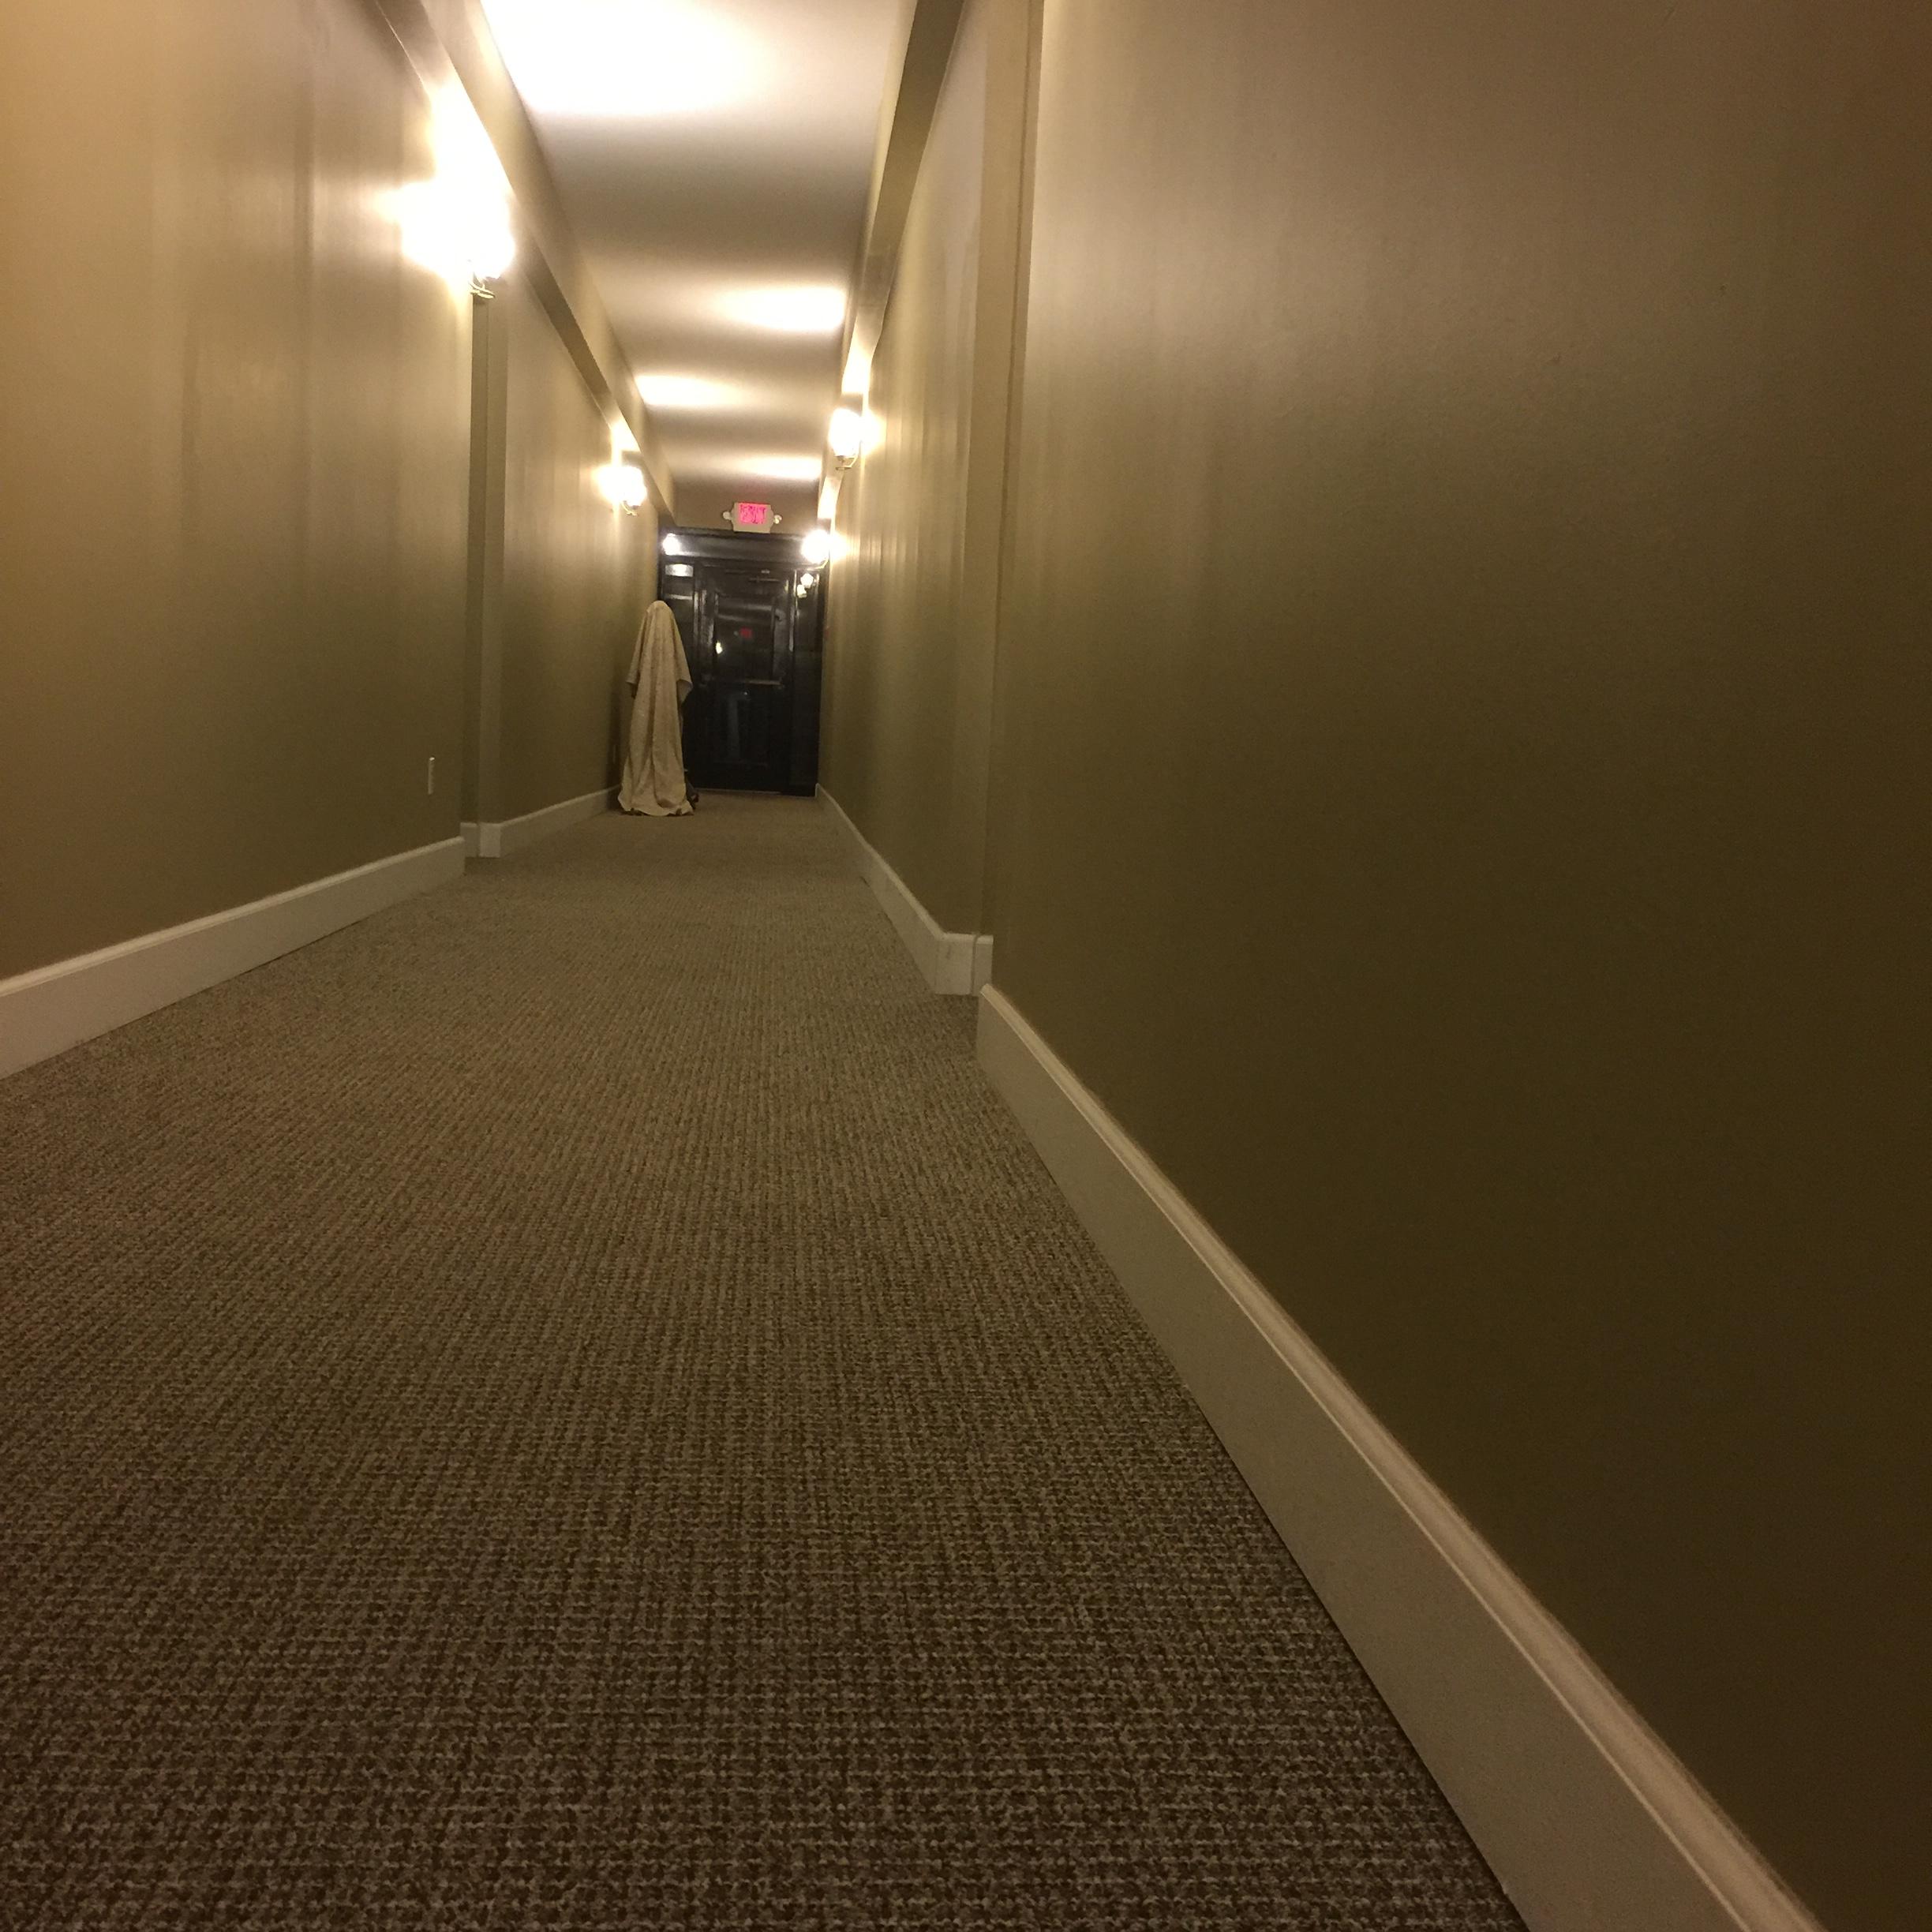 Guy Finds a Terrifying Sight in His Building at 3 am